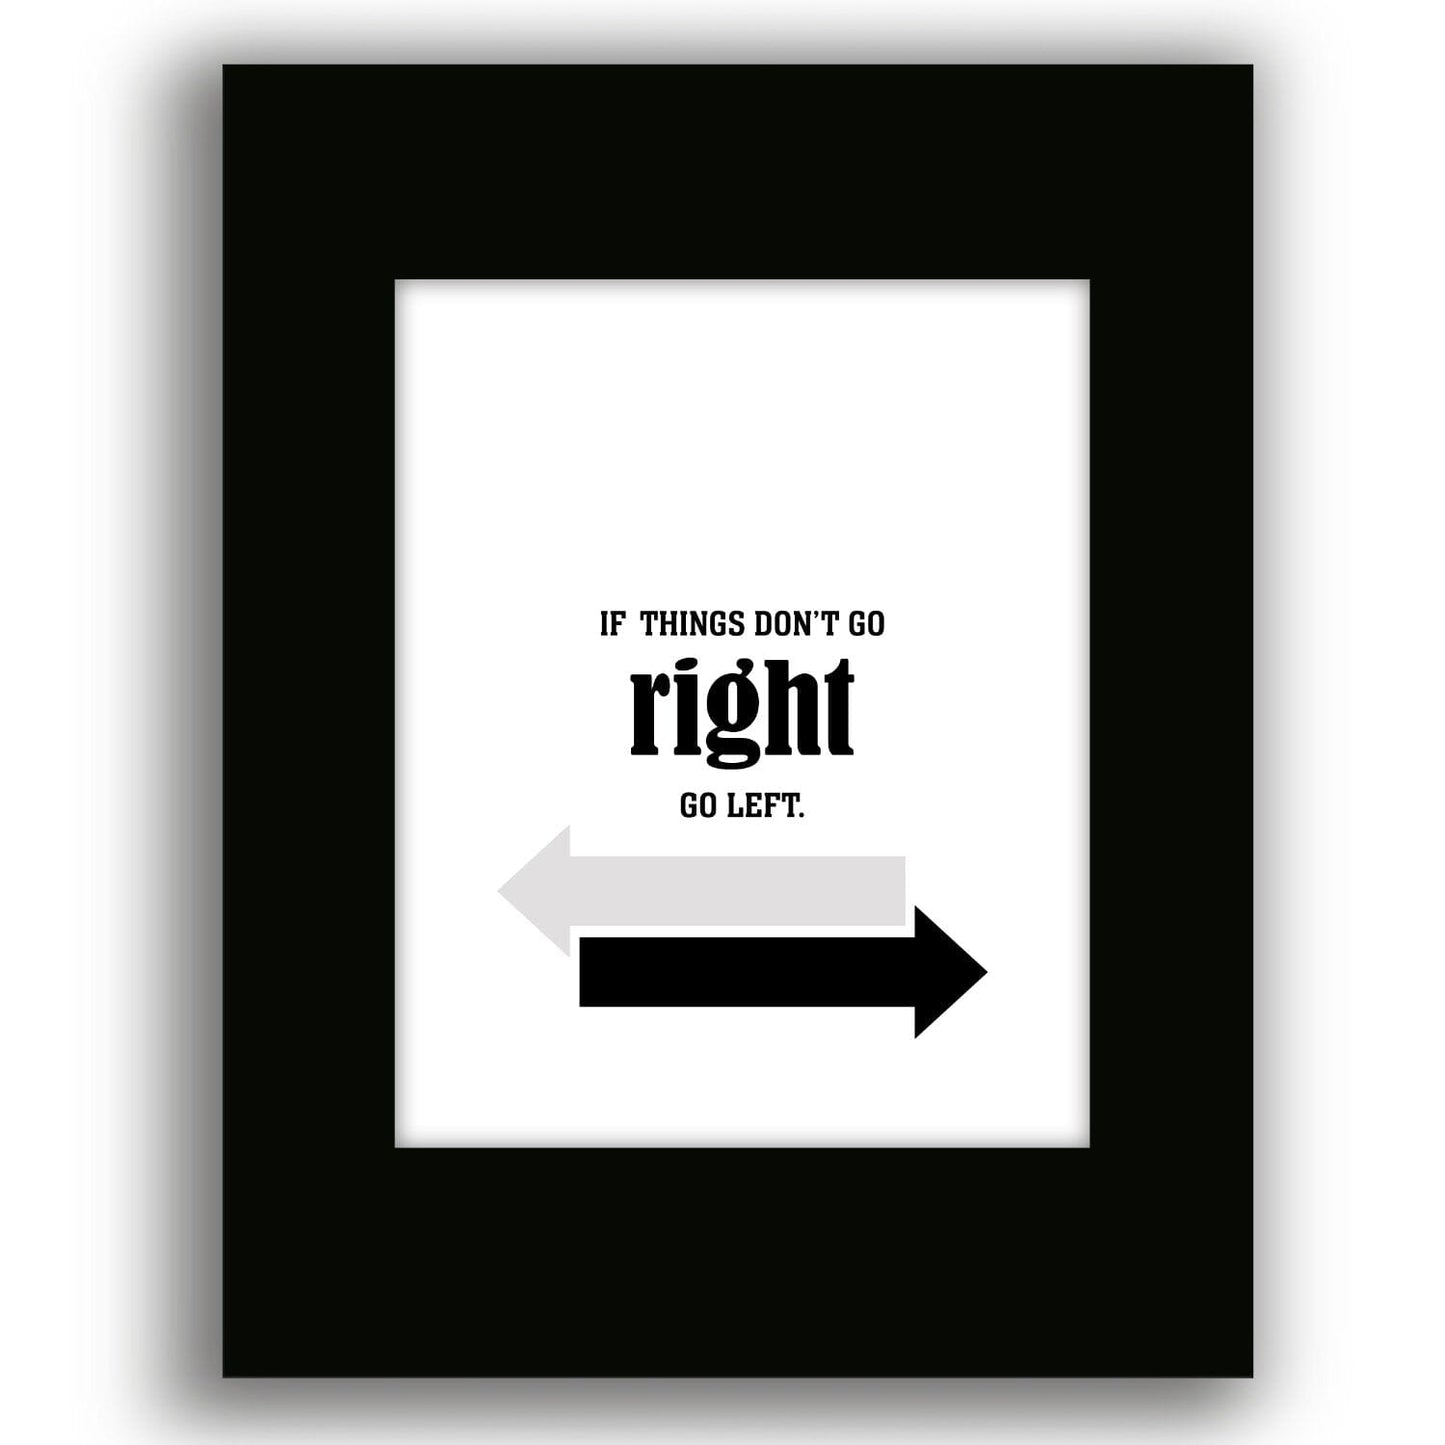 If Things Don't go Right, Go Left - Wise and Witty Word Art Wise and Wiseass Quotes Song Lyrics Art 8x10 Black Matted Print 